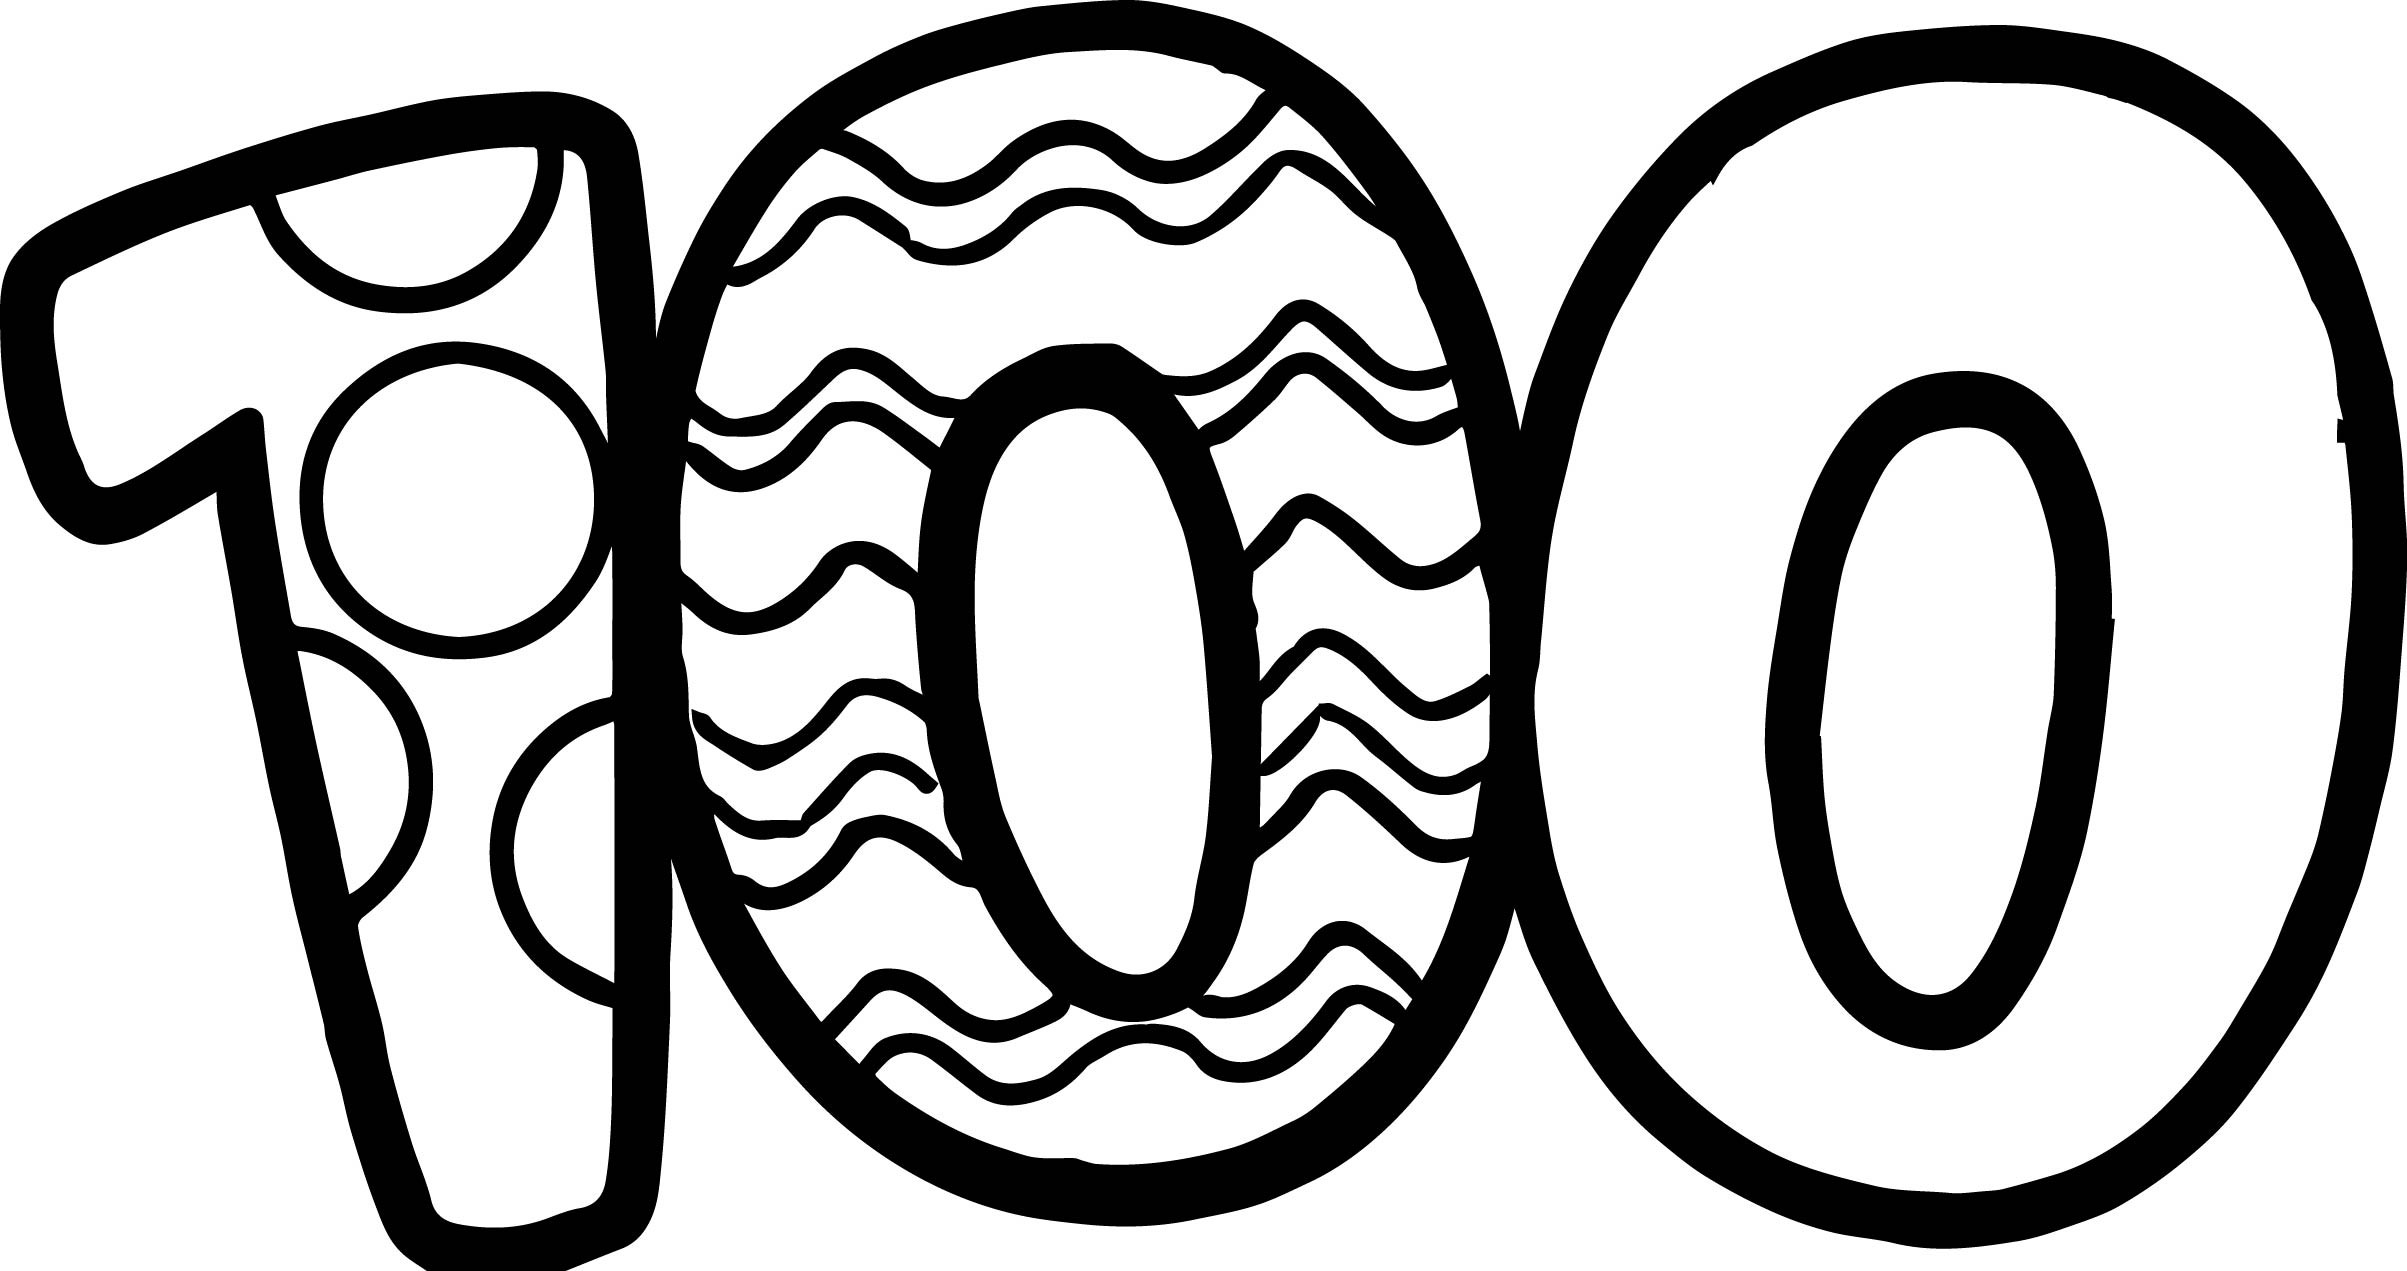 100 Days Coloring Pages
 100 Days School Number Coloring Page